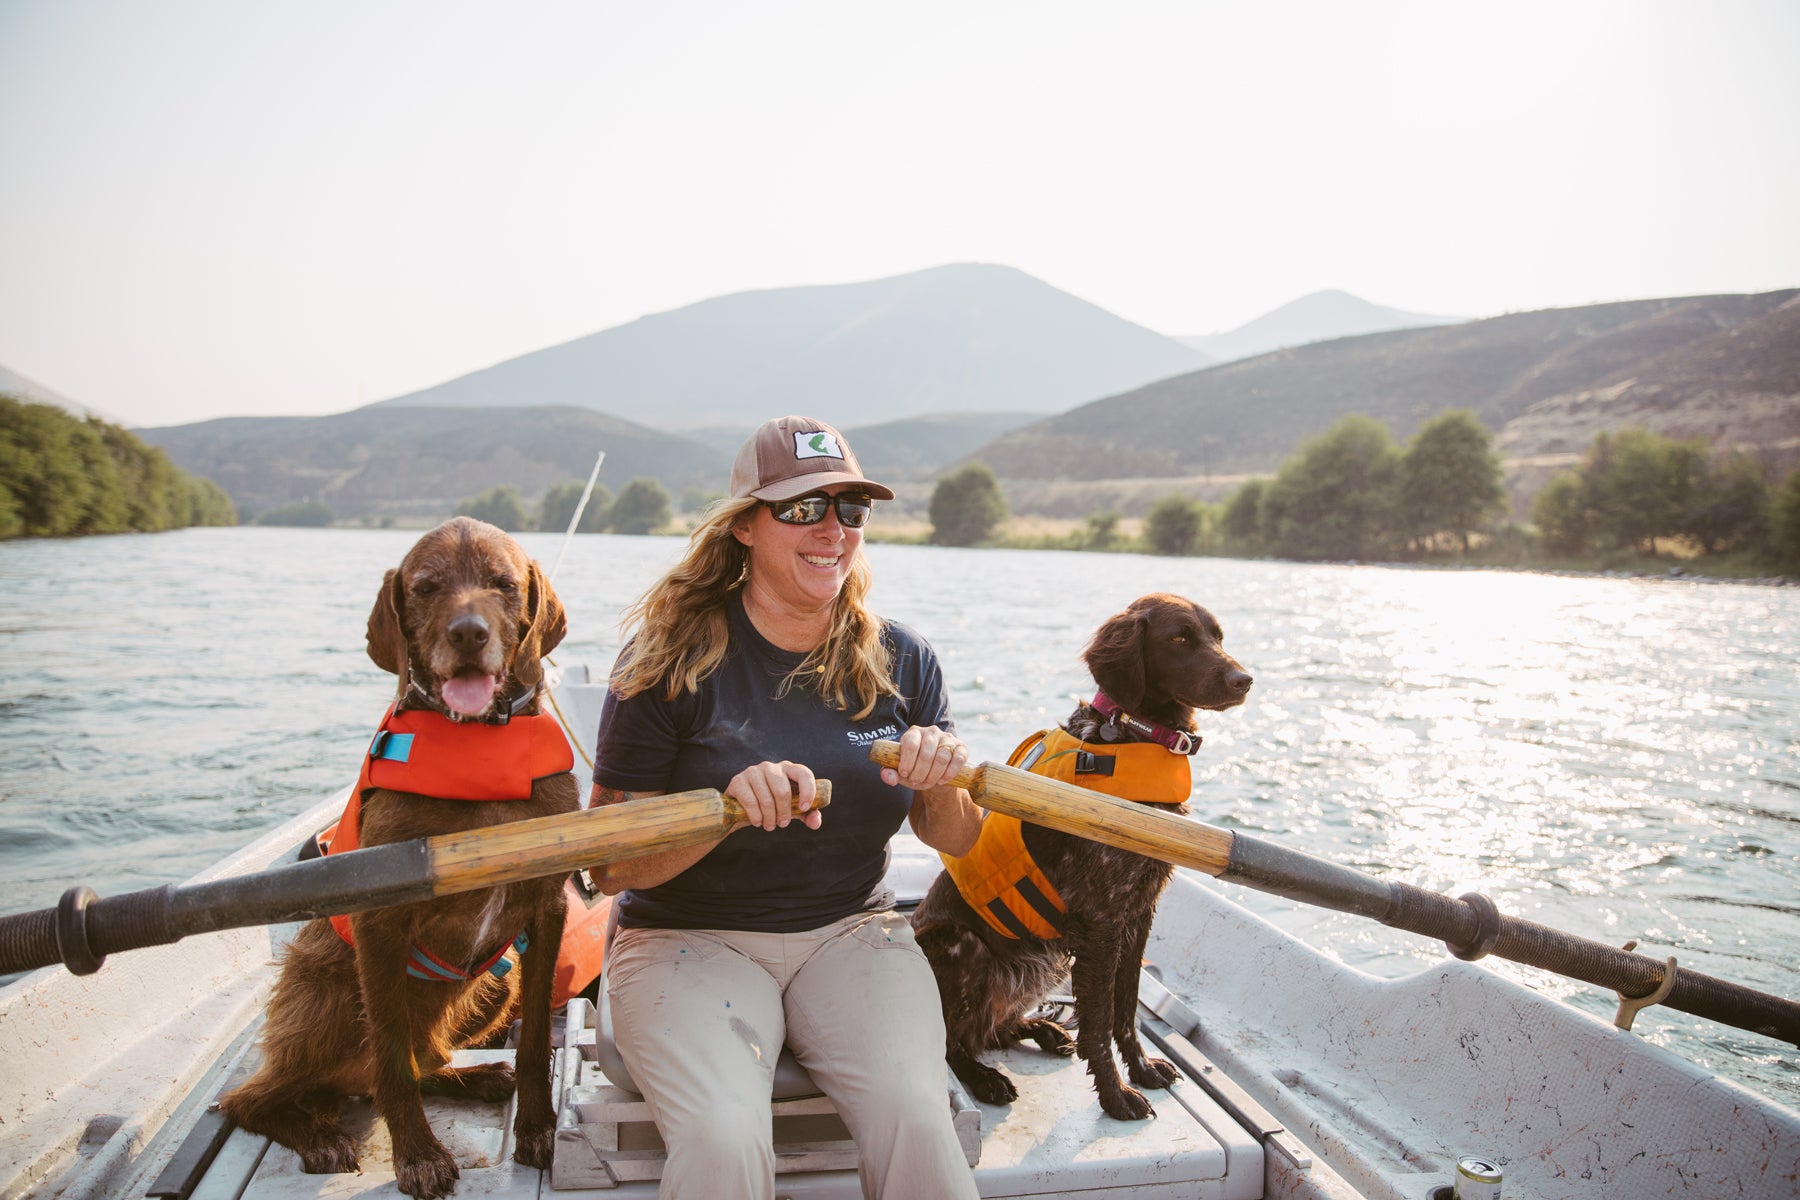 Mia with dogs Eddy and Cedar in Float coat dog life jackets in fishing boat on deschutes river.